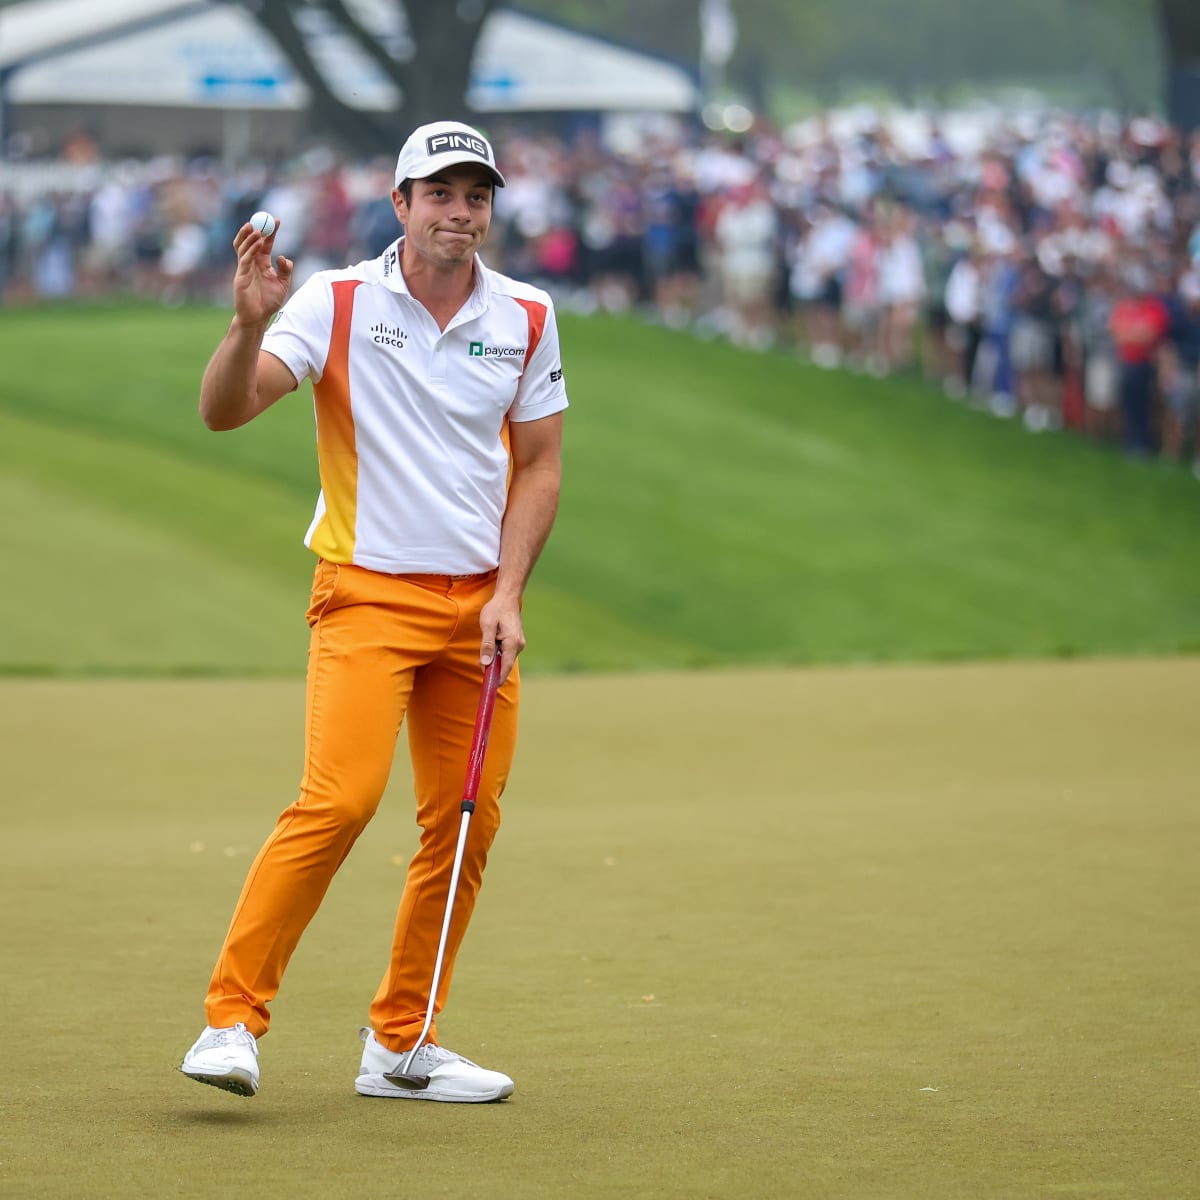 Same as a certain sweater or shirt” – Golf world reacts to wearing joggers  on the golf course